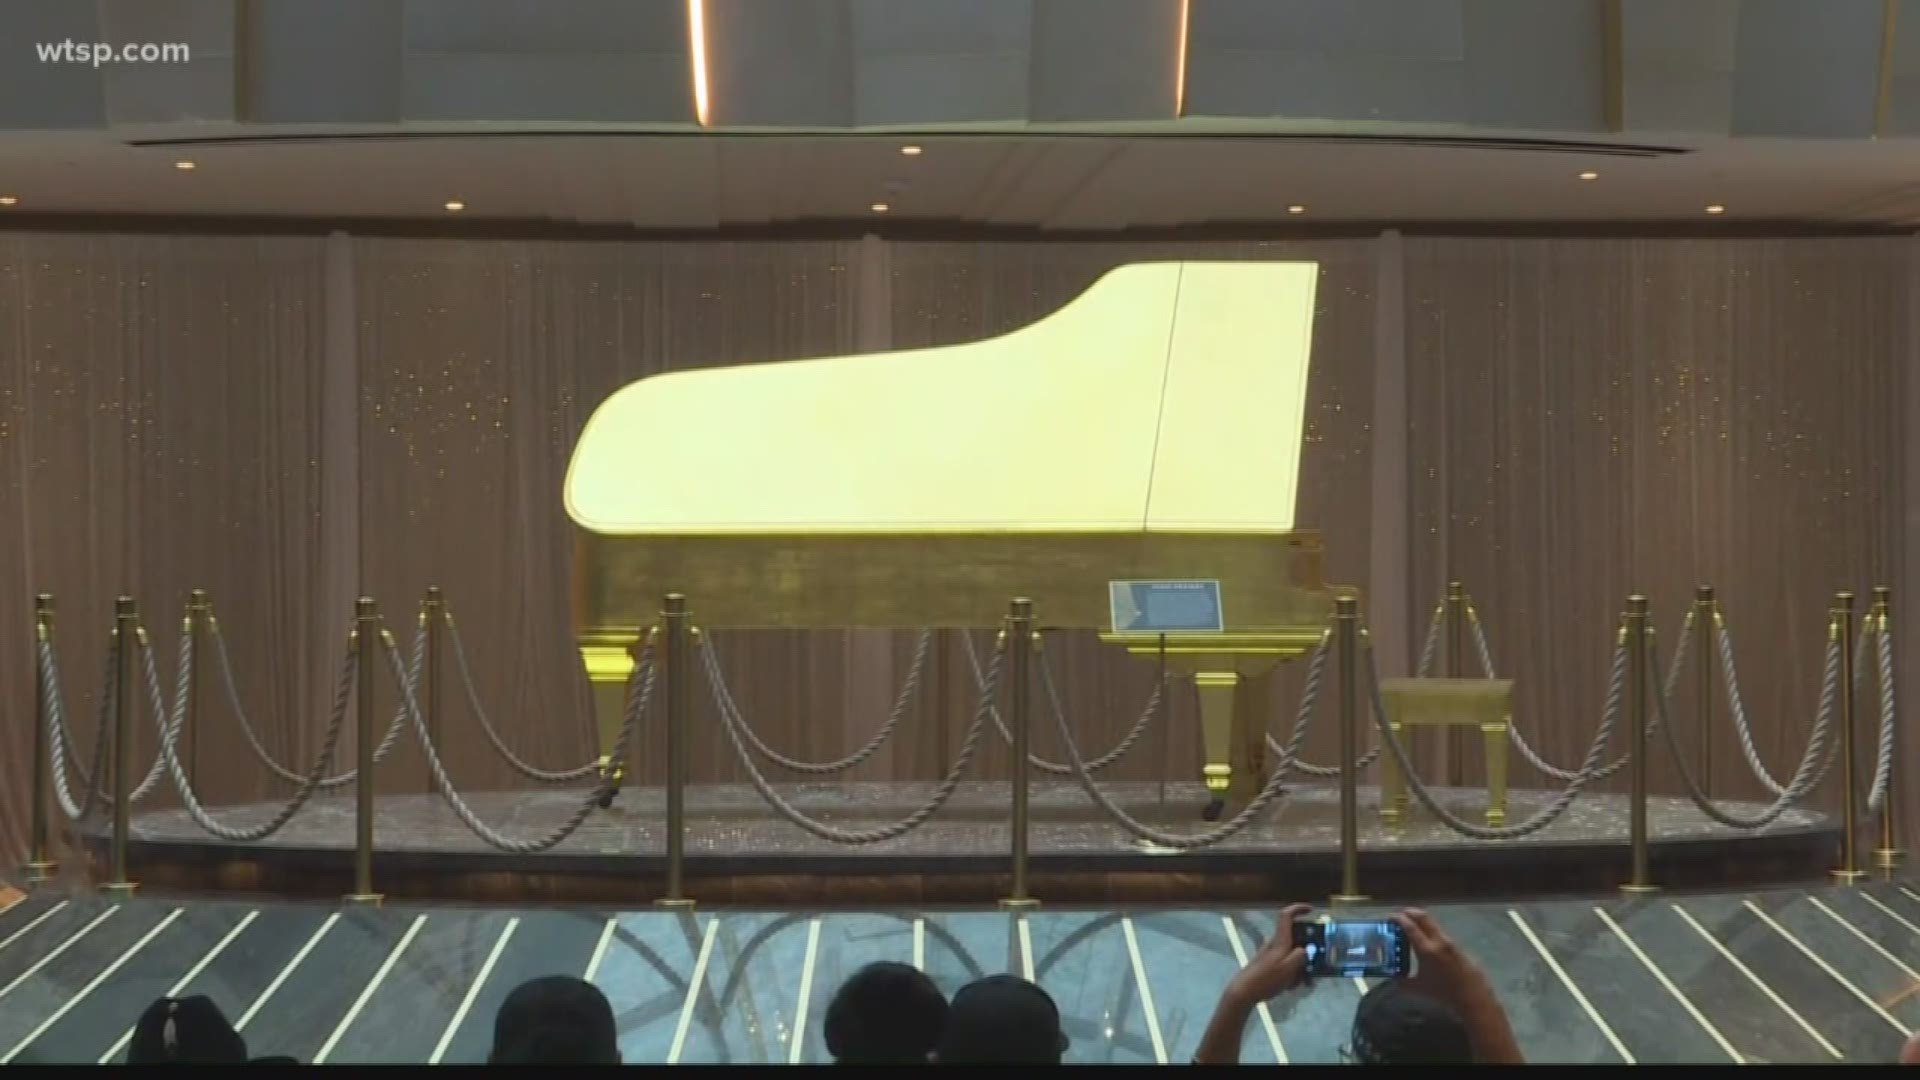 The piano is part of the Hard Rock Hotel & Casino's expansions, which are set to be done in October. It'll be on display in the new grand entrance.